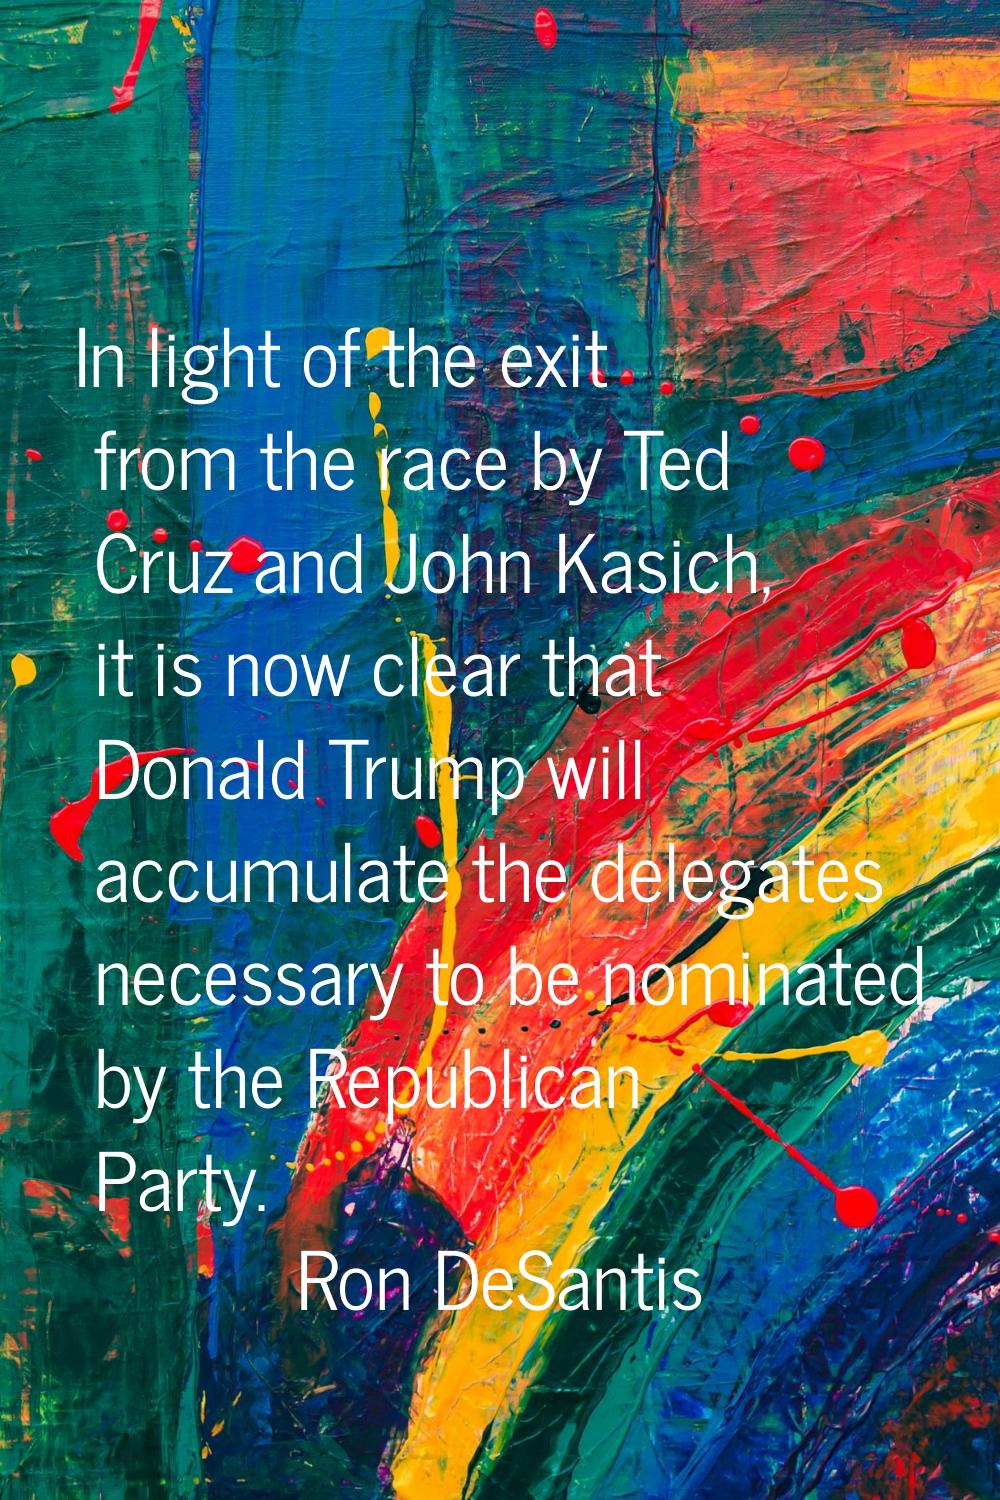 In light of the exit from the race by Ted Cruz and John Kasich, it is now clear that Donald Trump w